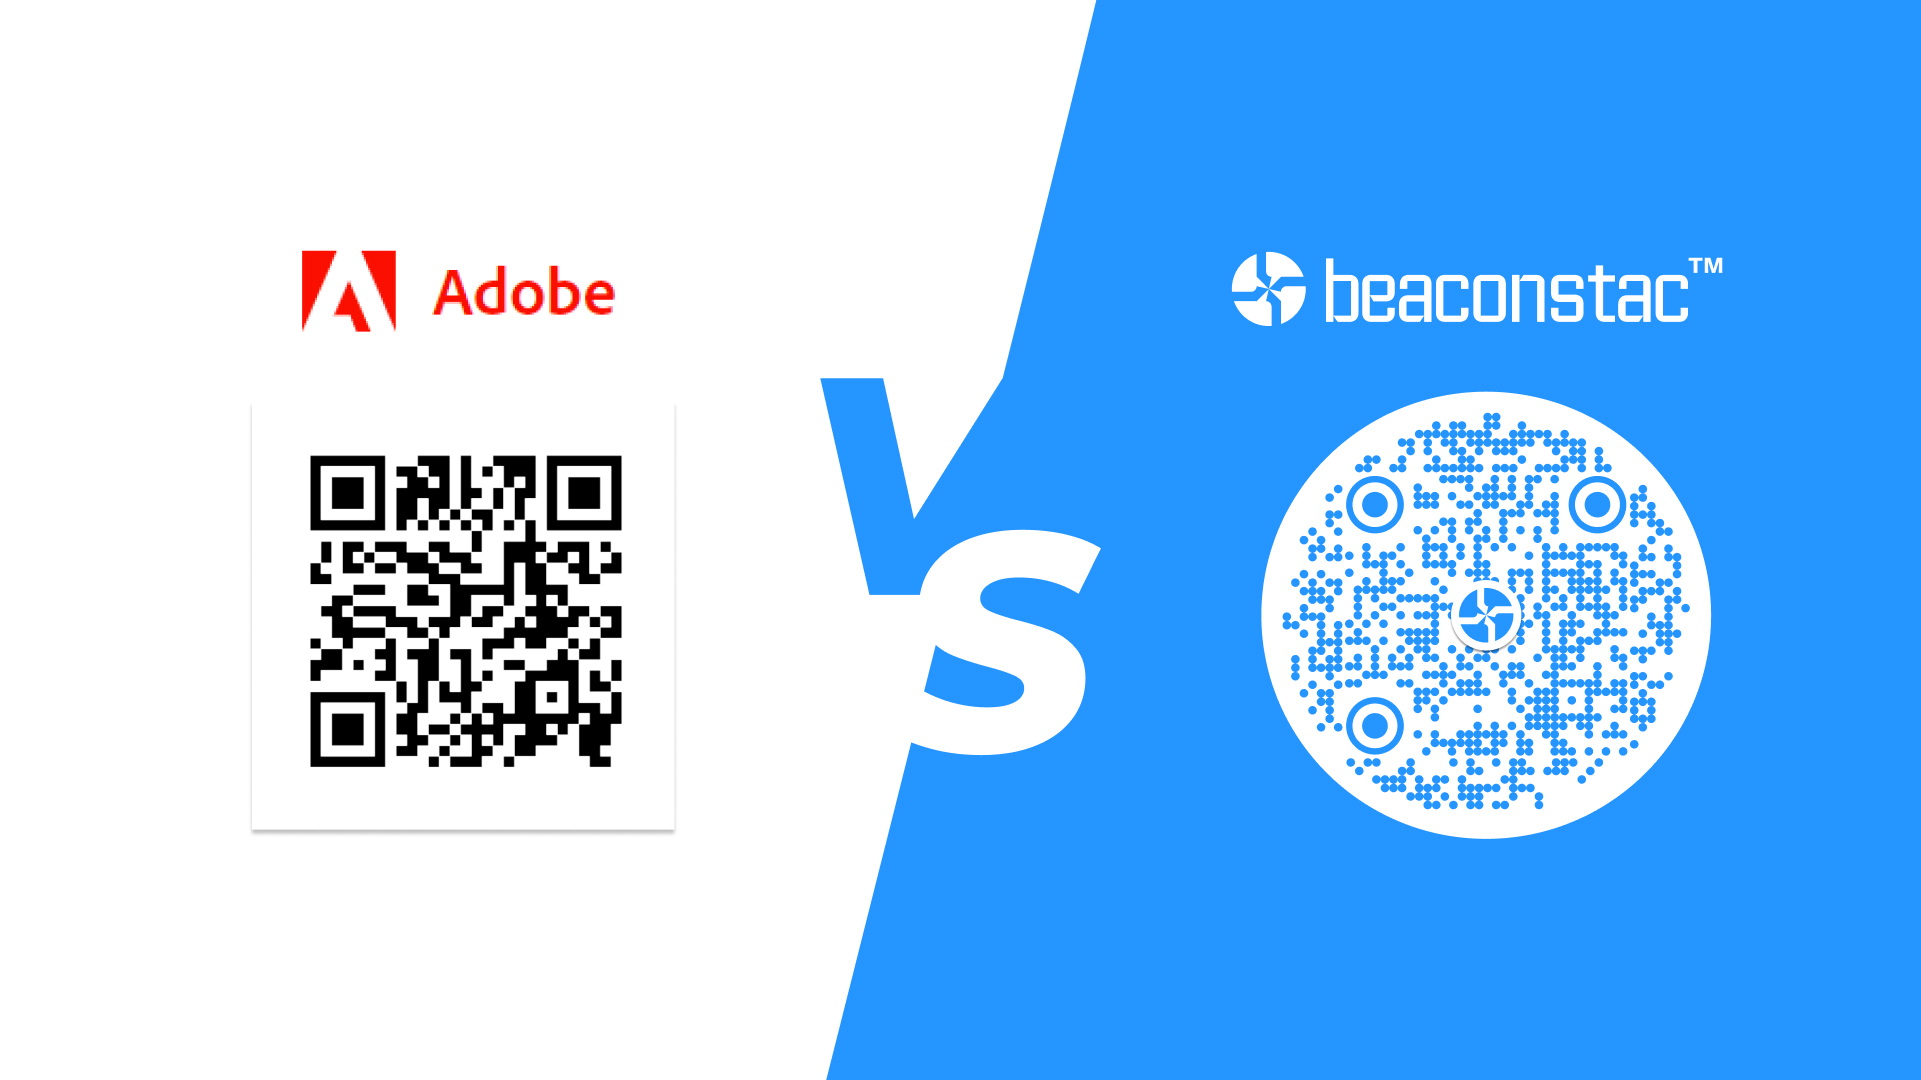 Adobe QR Code vs. Beaconstac QR Code: Which One Should You Choose?